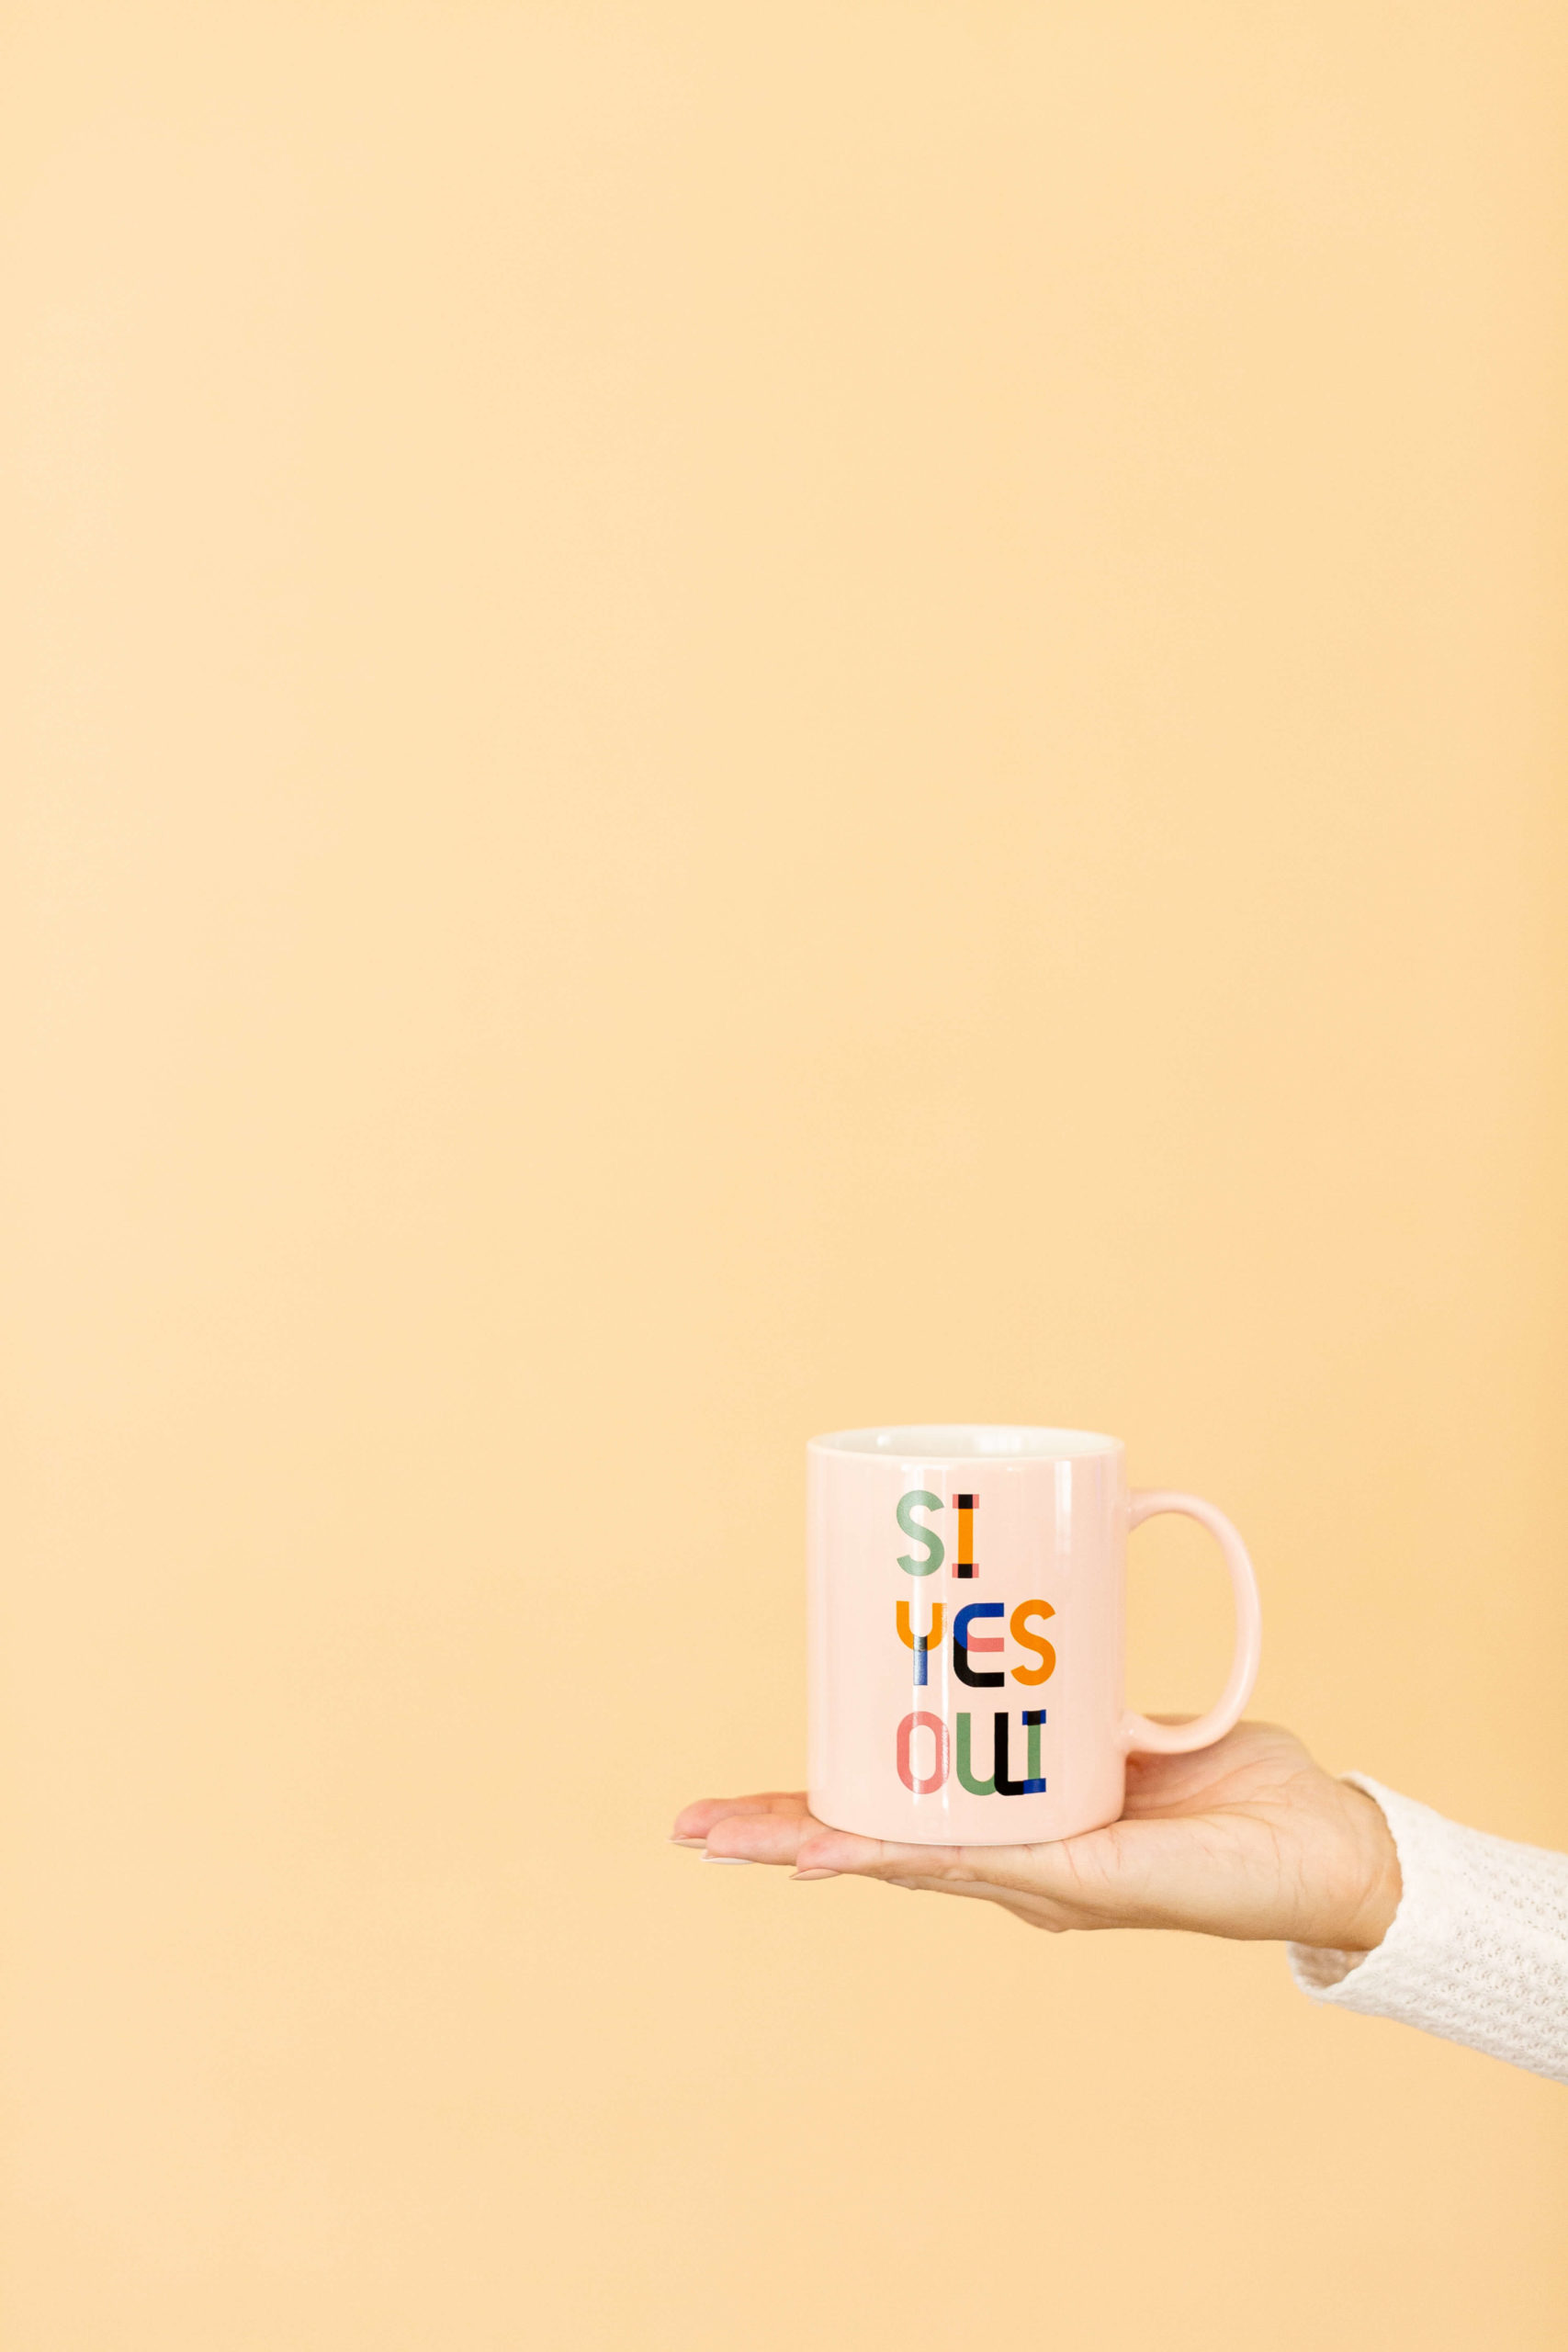 A cute mug that reads, "Si, Yes, Oui" it is time to do an annoyance in your biz and get more s#%t done with ease!